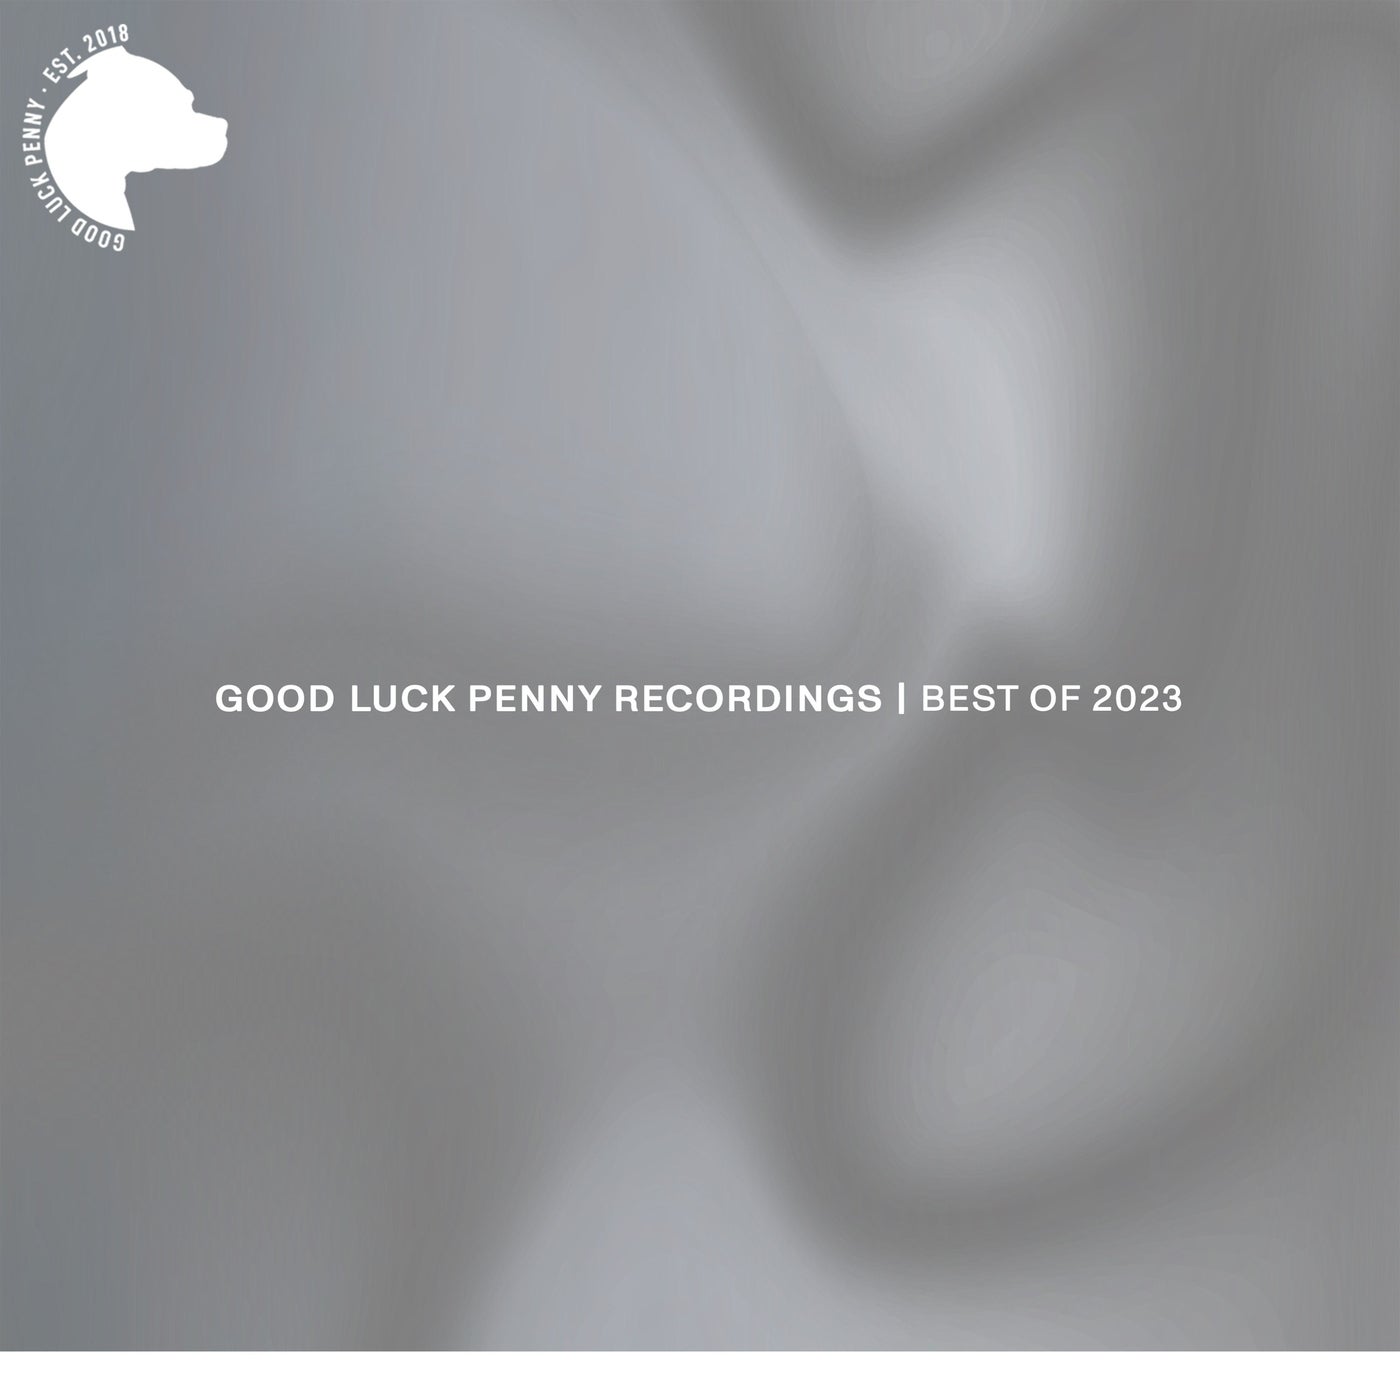 Good Luck Penny: Best of 2023